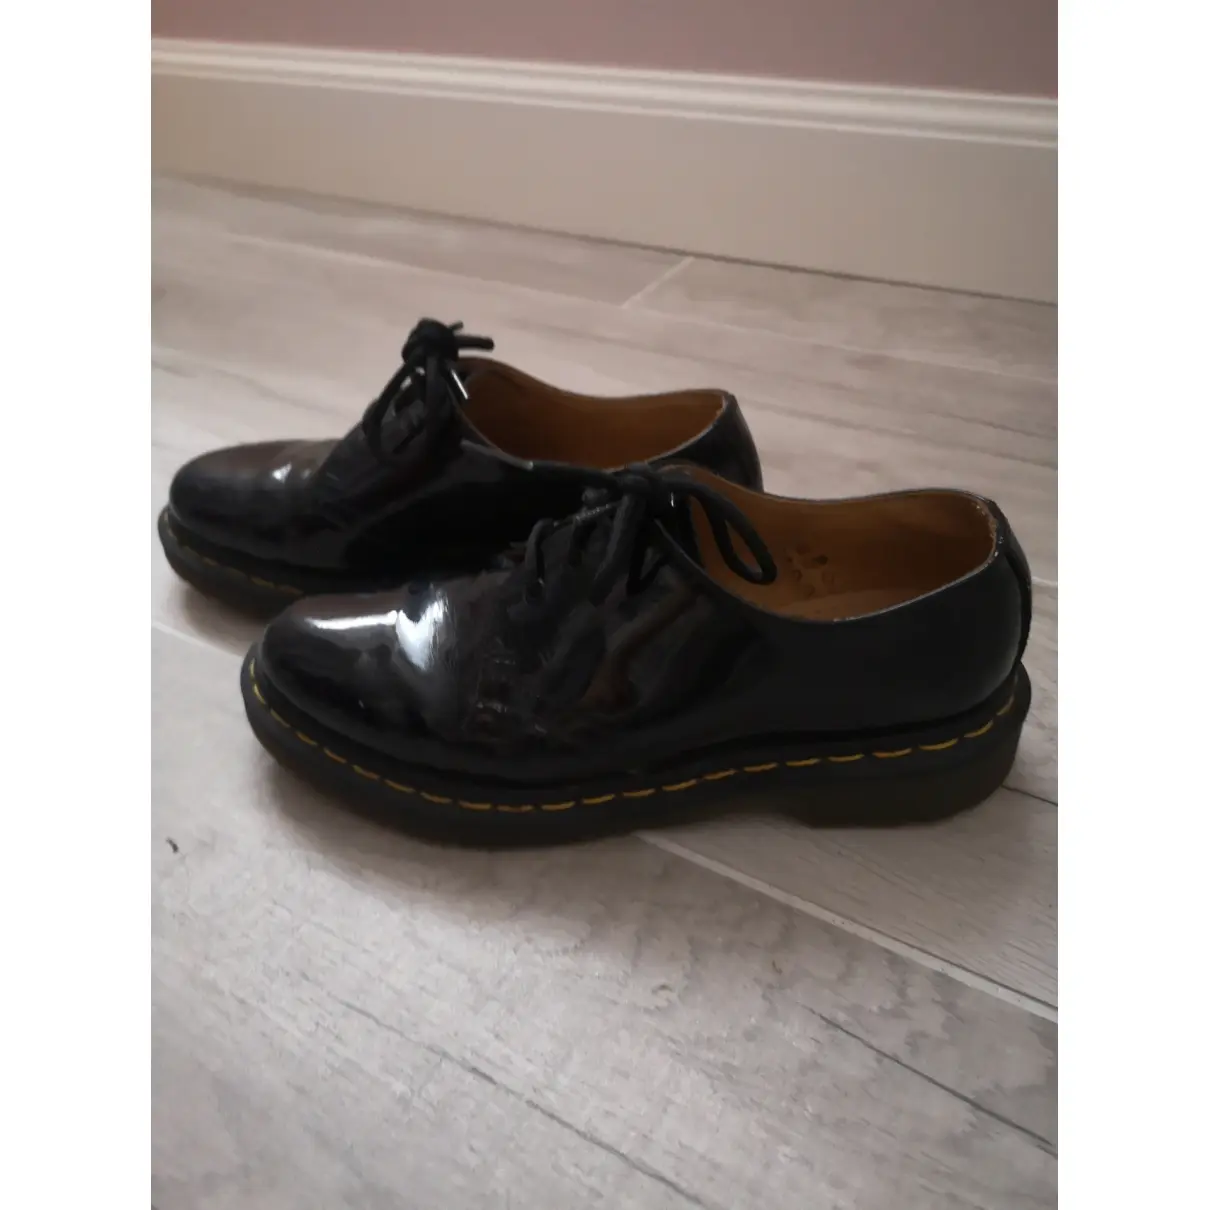 Buy Dr. Martens Patent leather lace ups online